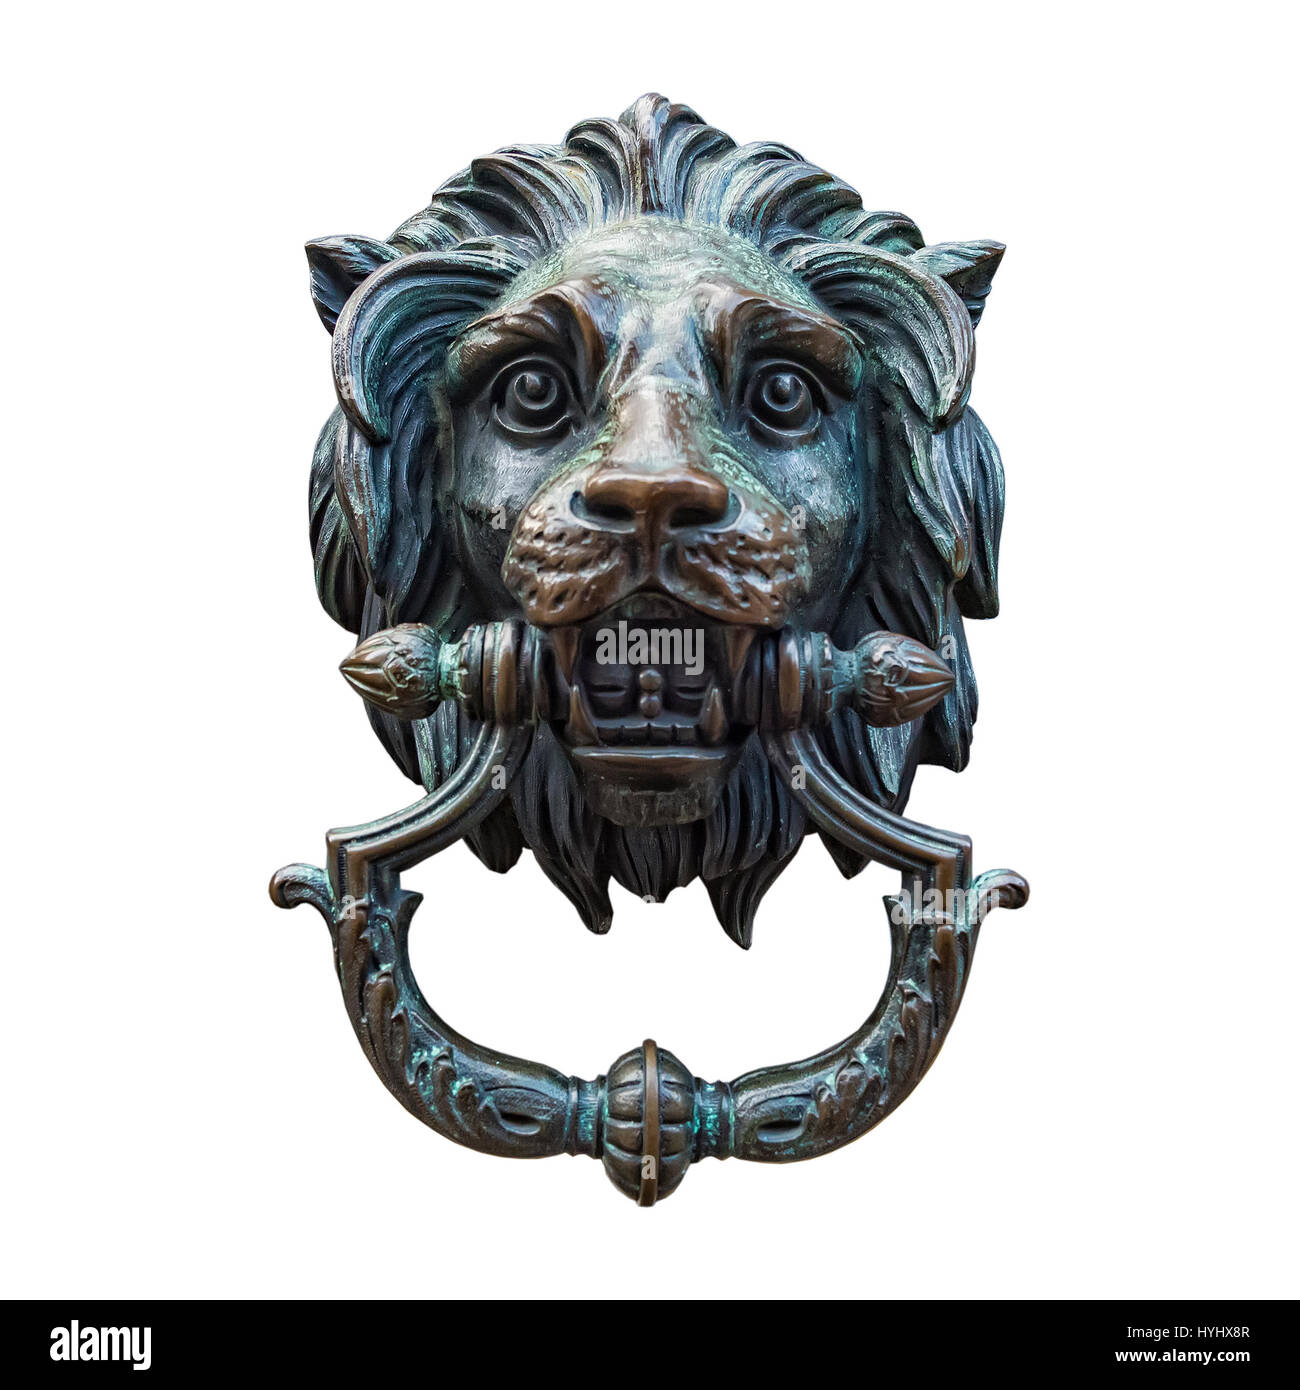 A classic lion head door knocker made out of metal and isolated against a white background. Stock Photo